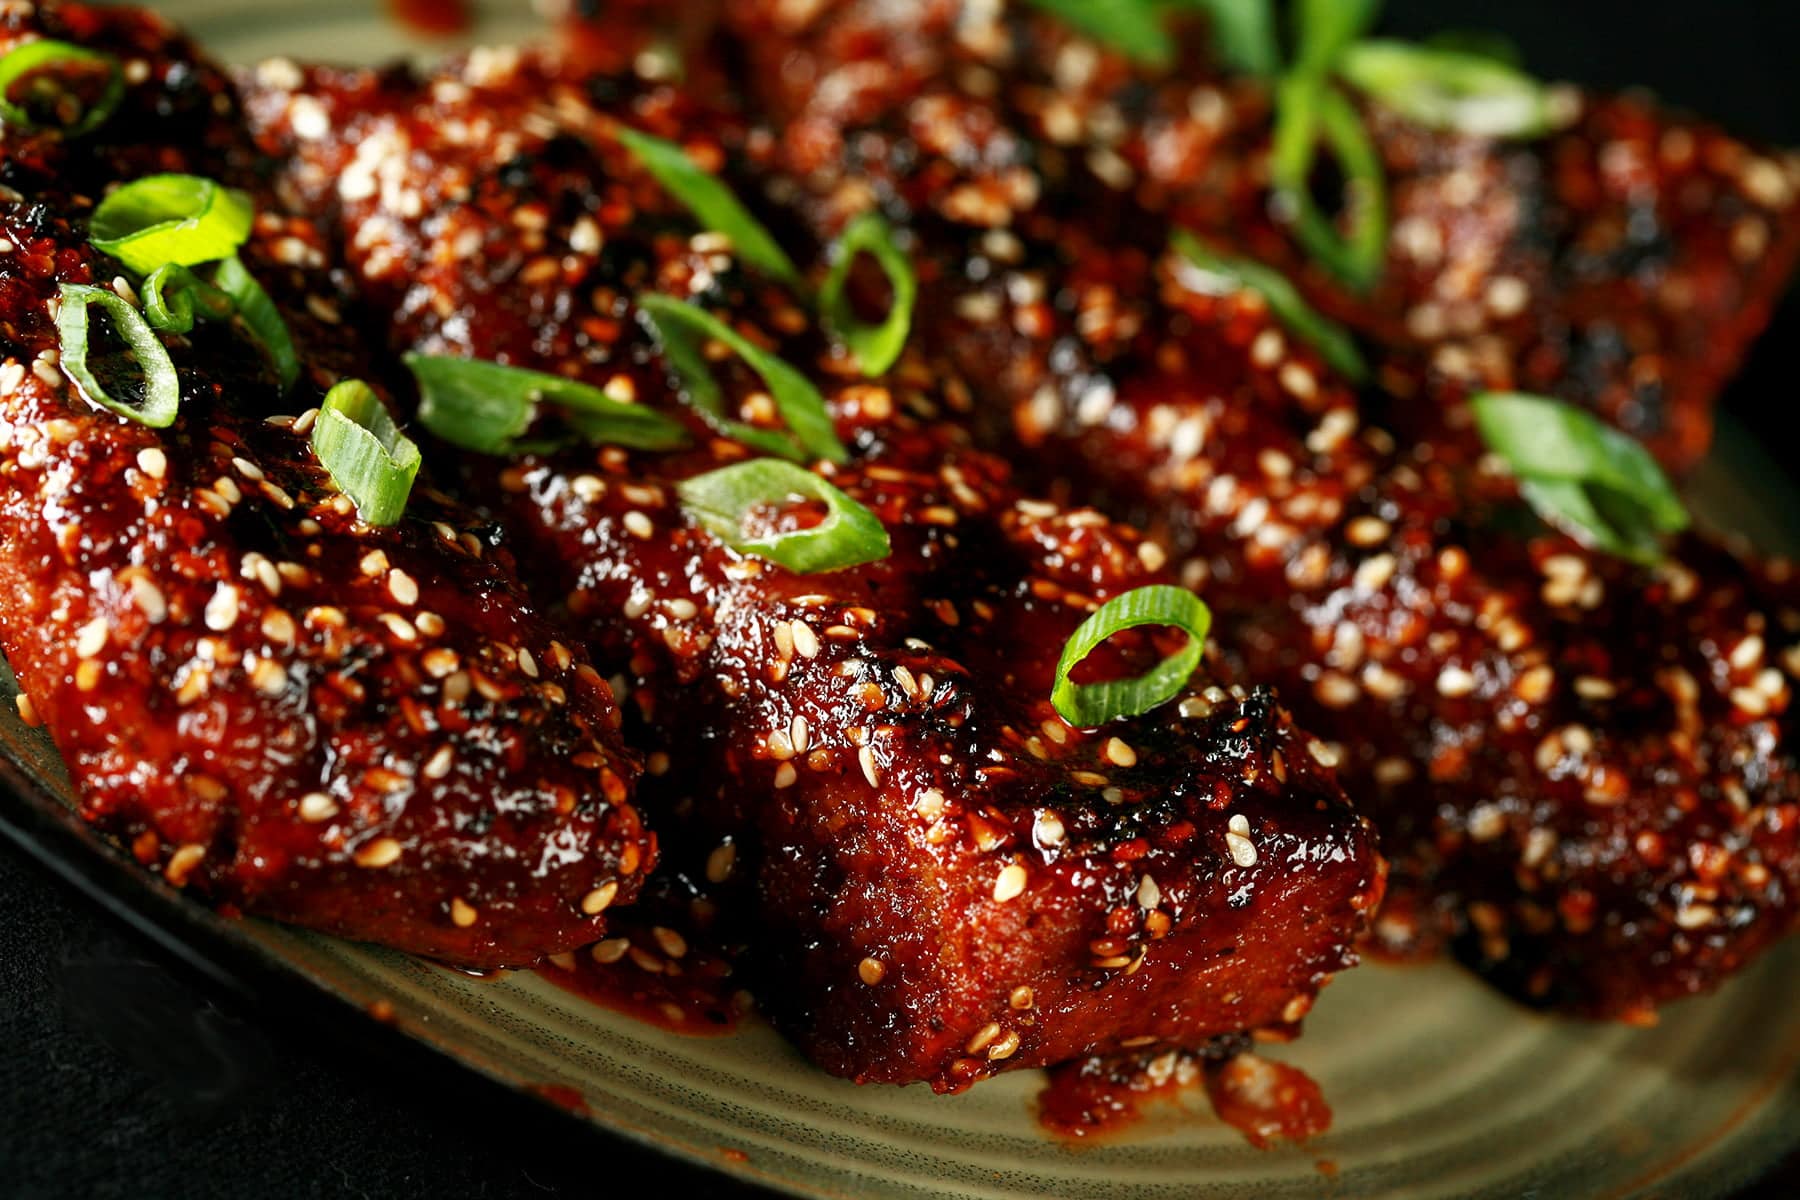 Close up photo of a plate of vegetarian boneless ribs. They're covered in a red-brown sauce, sesame seeds, and sliced green onion.